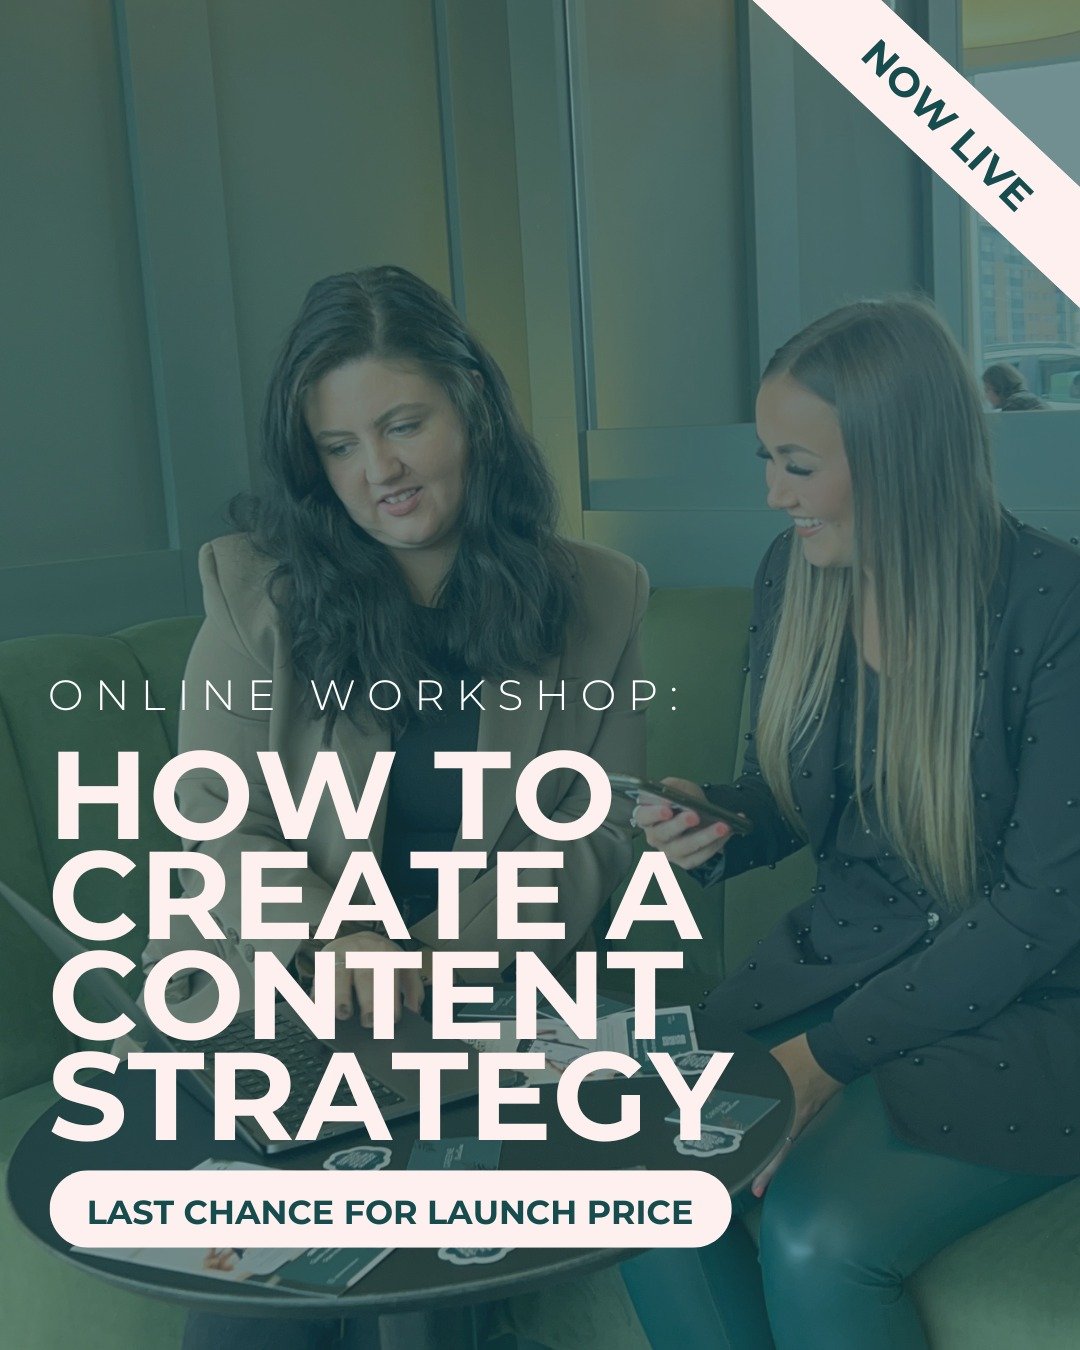 ⏳ Last Chance Alert! ⏳ 

Our &quot;How to Create a Content Strategy&quot; workshop is about to jump from &pound;50 to &pound;65! Don't miss this opportunity to learn from social media experts at a launch price.

What&rsquo;s included 👇🏼
* A 45-minu